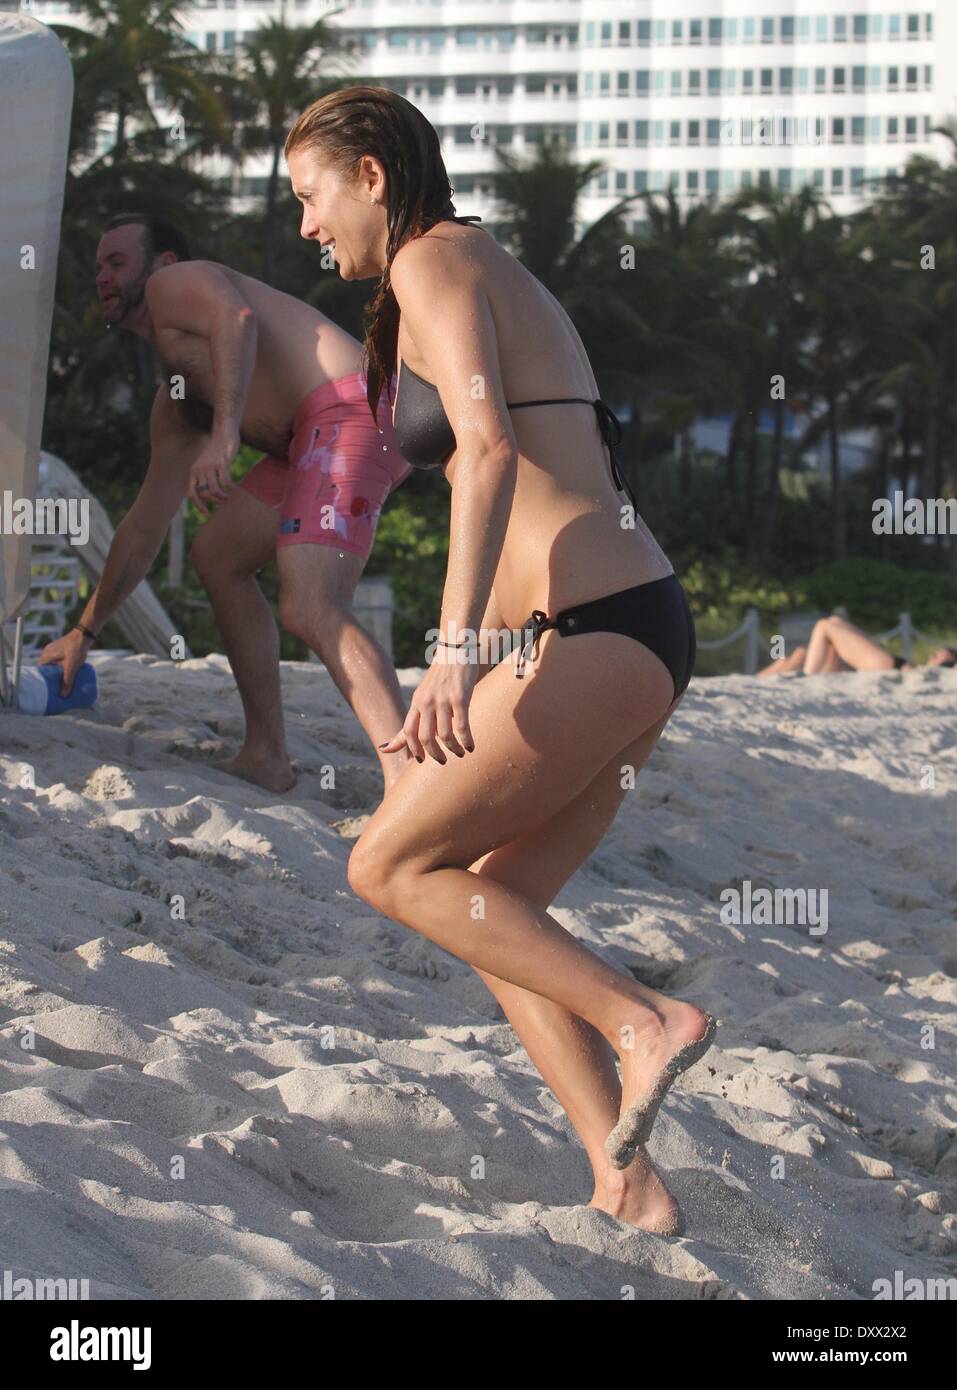 Kate Walsh shows off her bikini body as she spends the day on the beach.  The "Grey's Anatomy" actress spent time sunbathing before going for a swim  in the ocean. Miami Beach, -